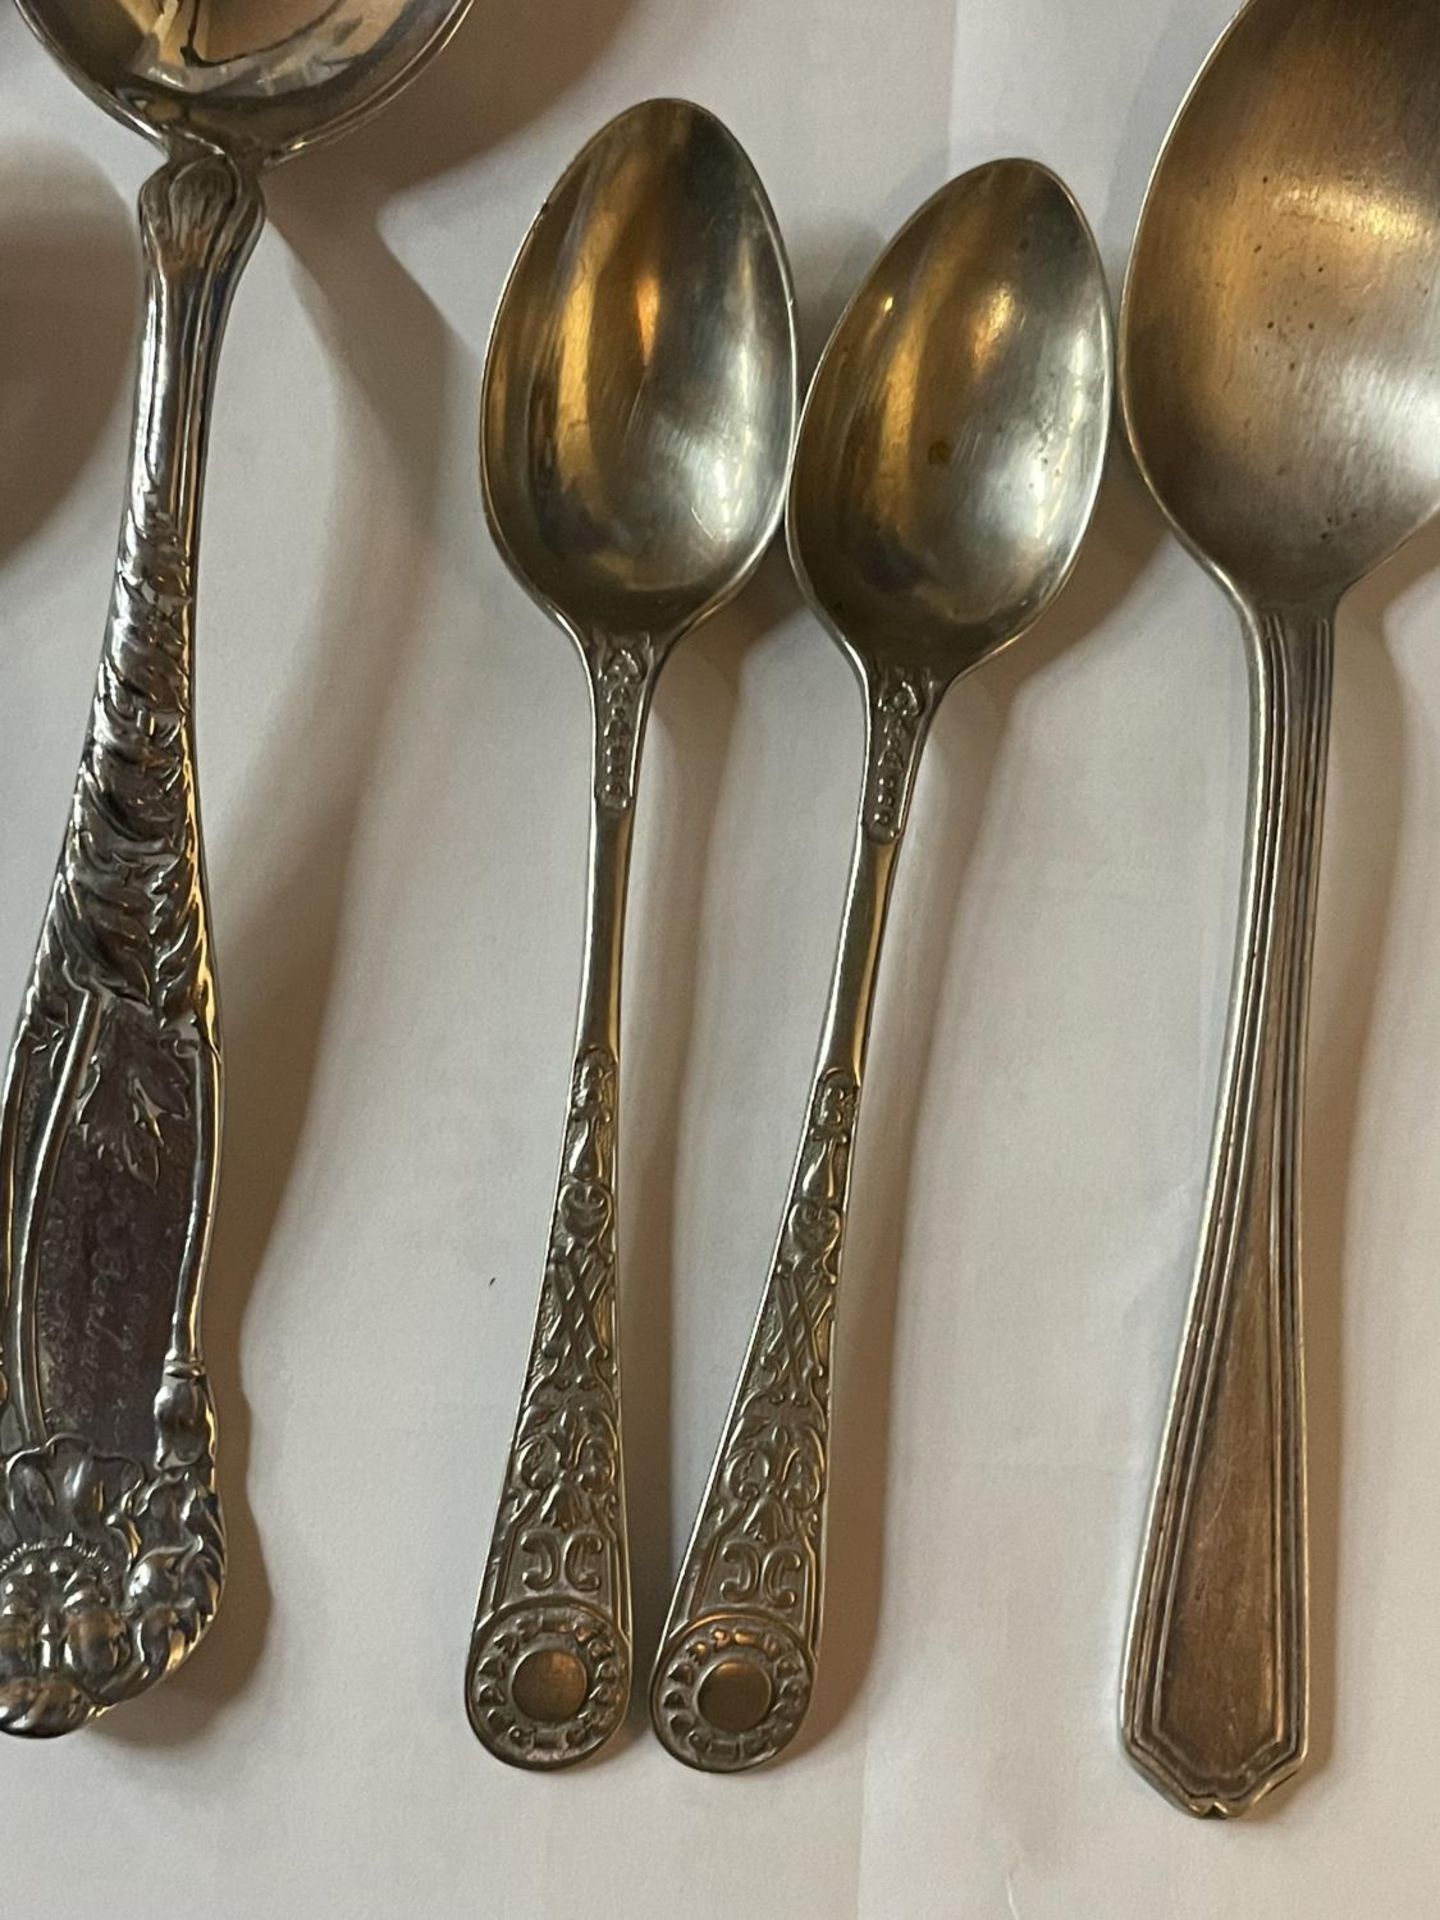 NINE VARIOUS SPOONS TO INCLUDE DECORATIVE SILVER PLATED EXAMPLES - Image 3 of 3